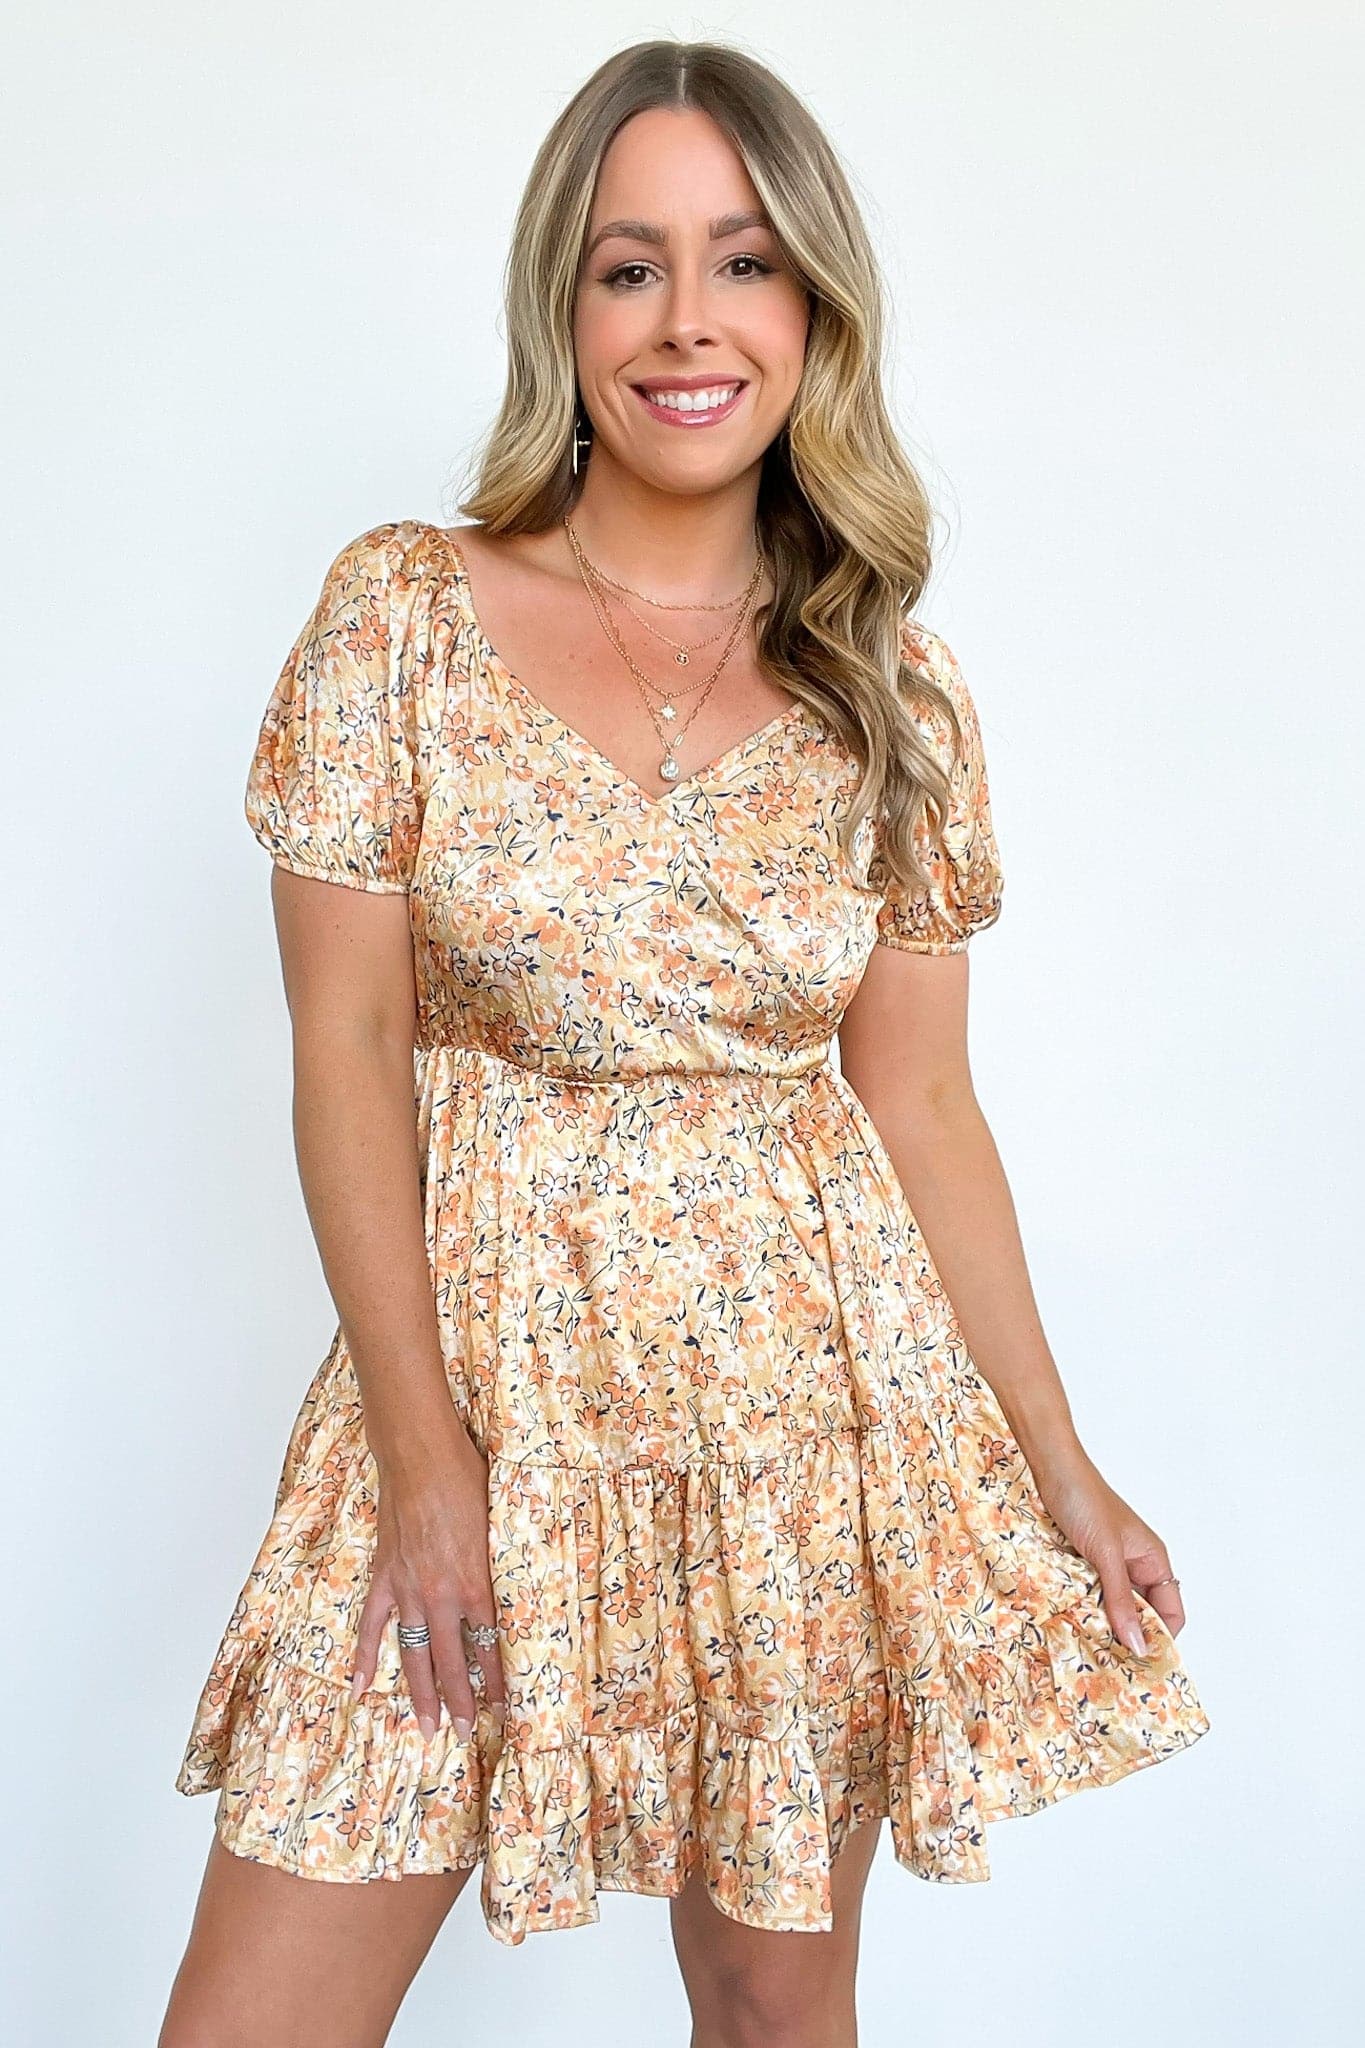  Meaningful Moments Floral Surplice Tiered Dress - FINAL SALE - Madison and Mallory